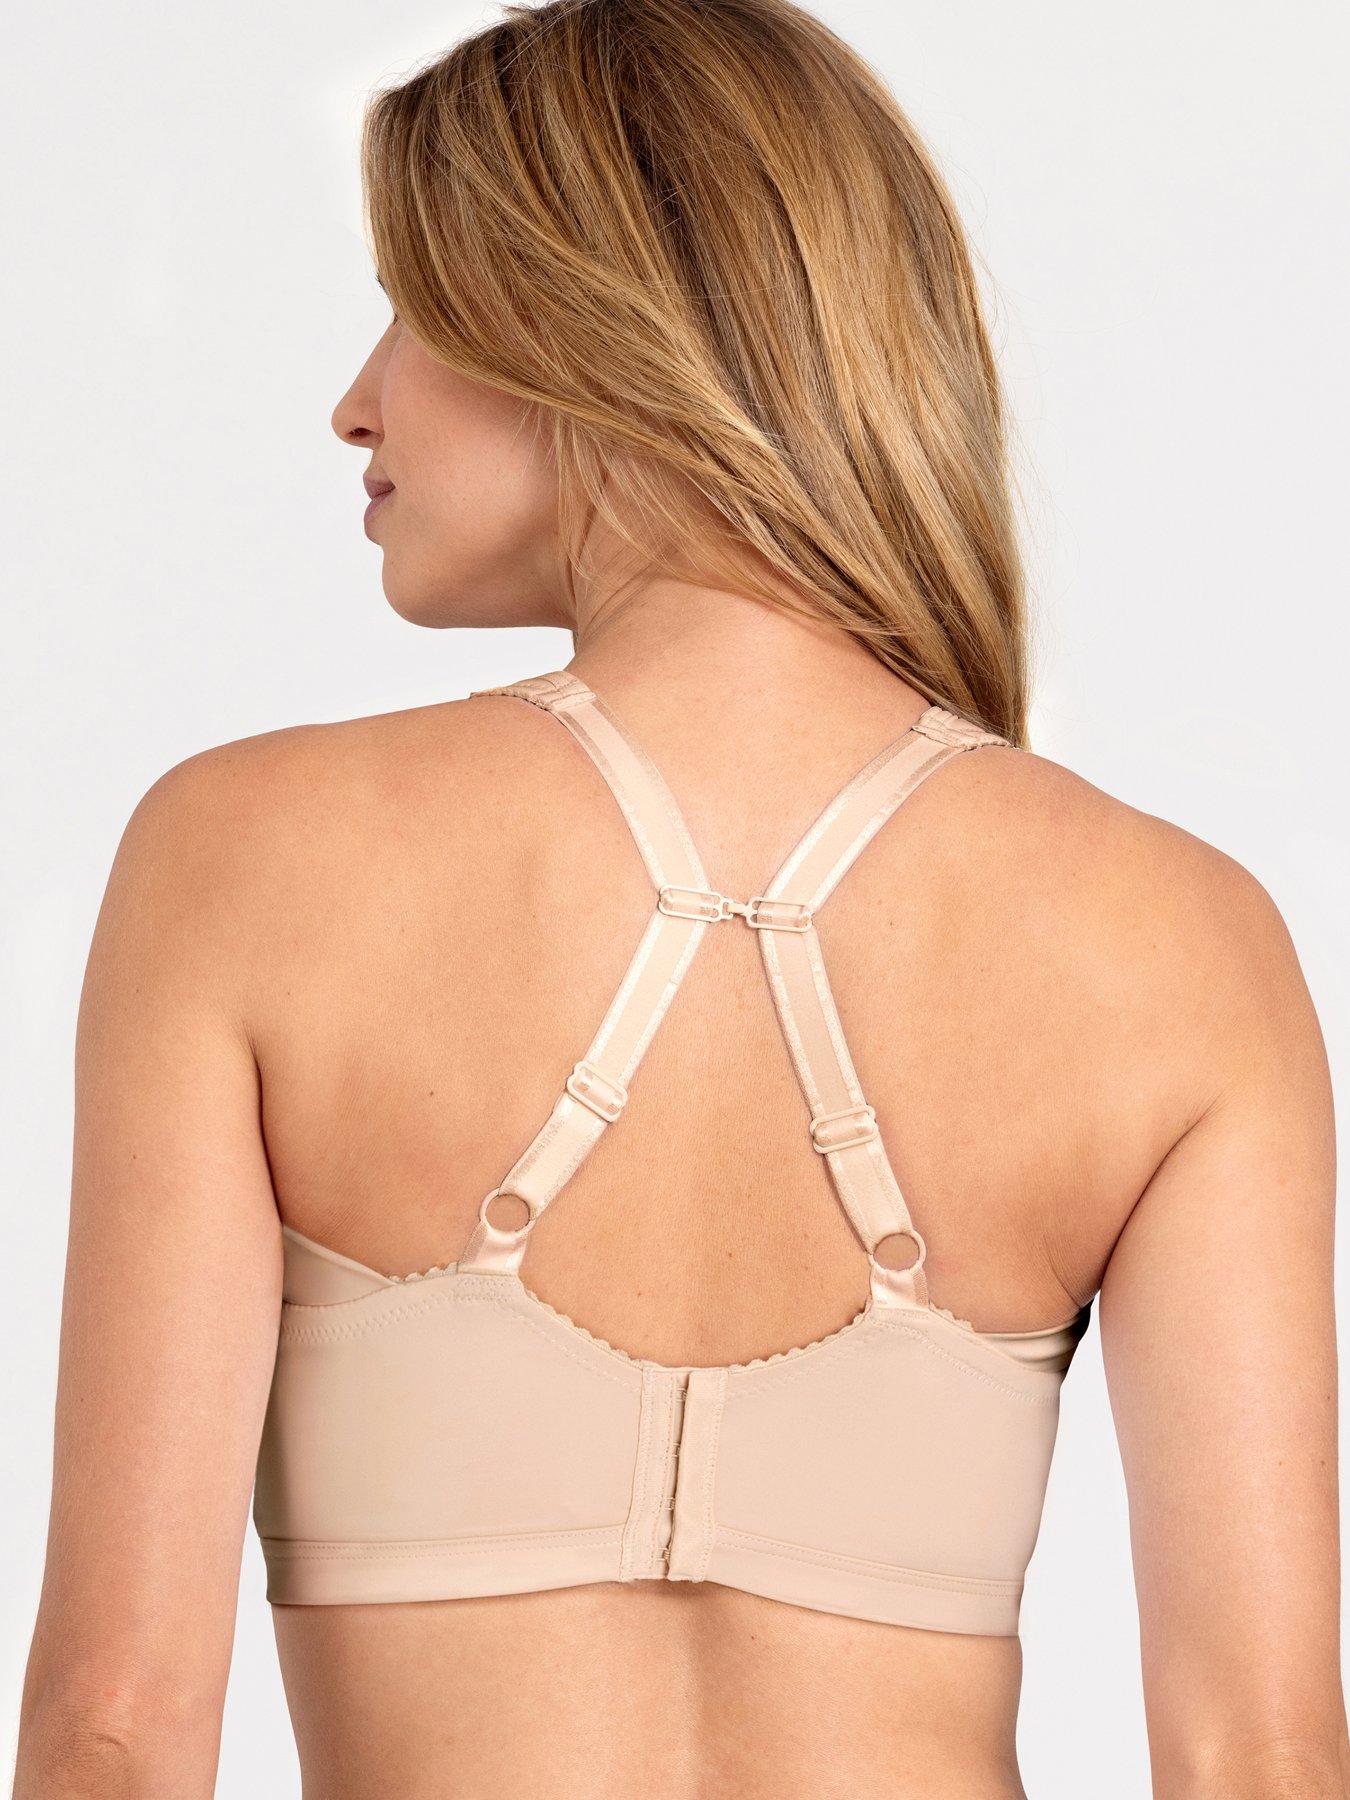 Keep Fresh Moulded Non-Wired Bra - Beige